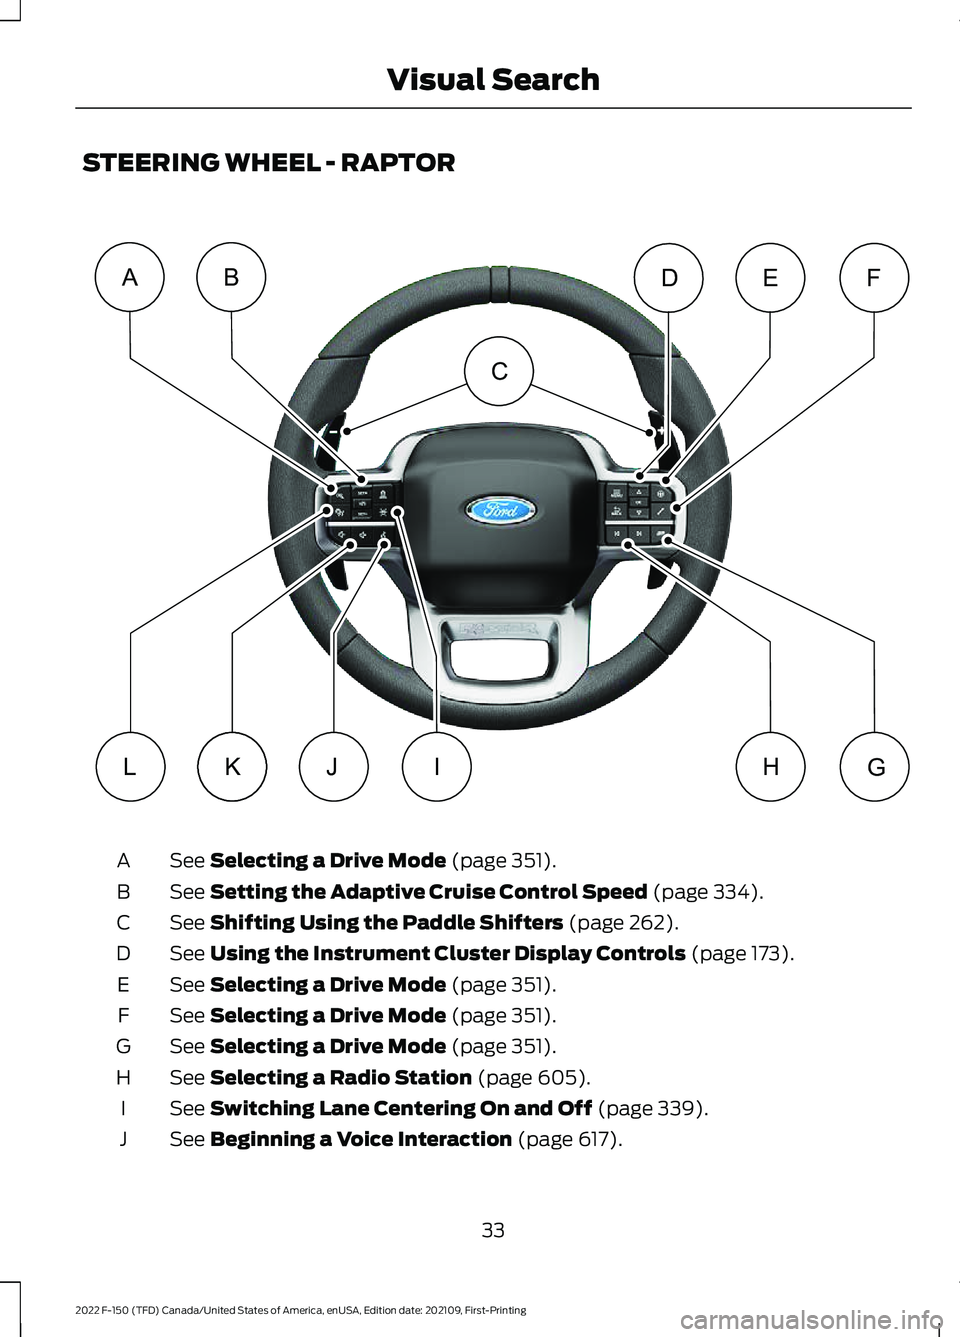 FORD F-150 2022  Owners Manual STEERING WHEEL - RAPTOR
See Selecting a Drive Mode (page 351).
A
See 
Setting the Adaptive Cruise Control Speed (page 334).
B
See 
Shifting Using the Paddle Shifters (page 262).
C
See 
Using the Instr